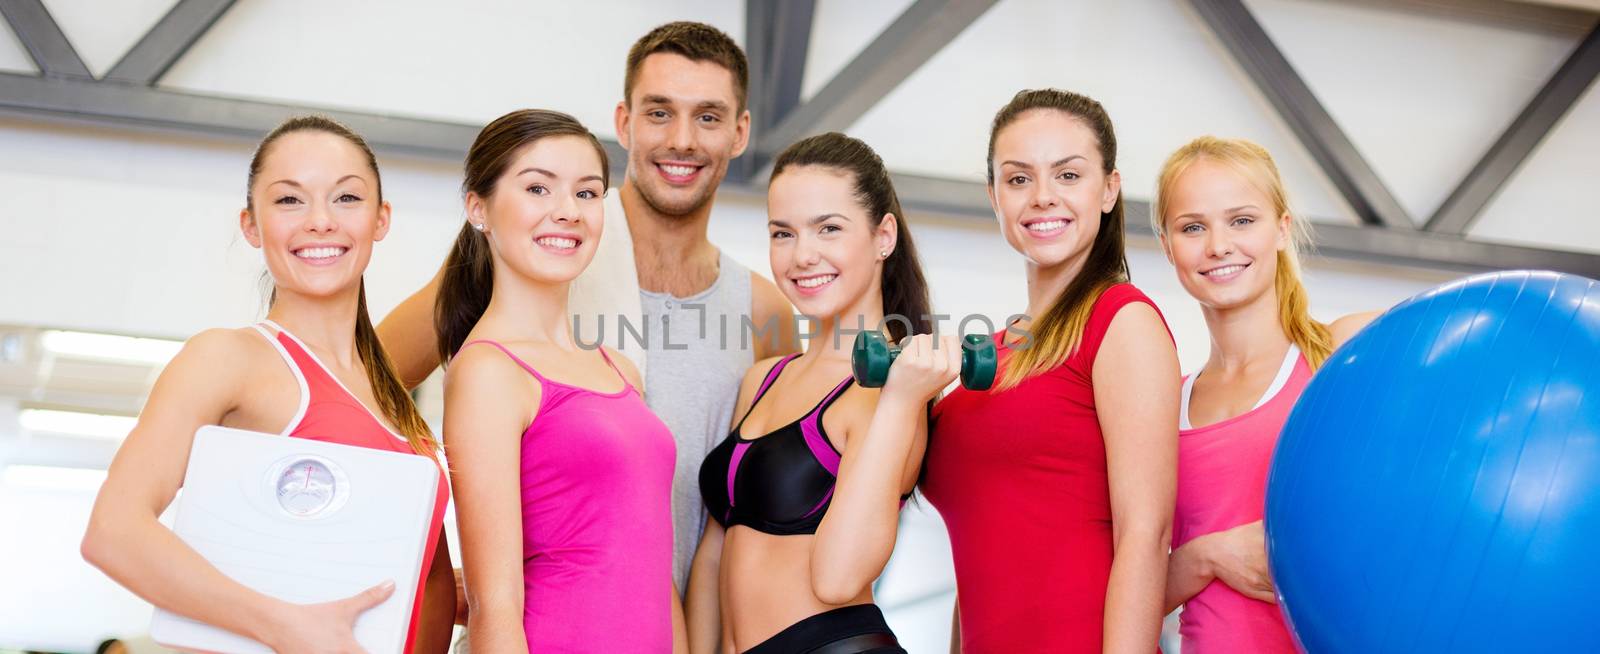 fitness, sport, training, gym and lifestyle concept - group of smiling people in the gym